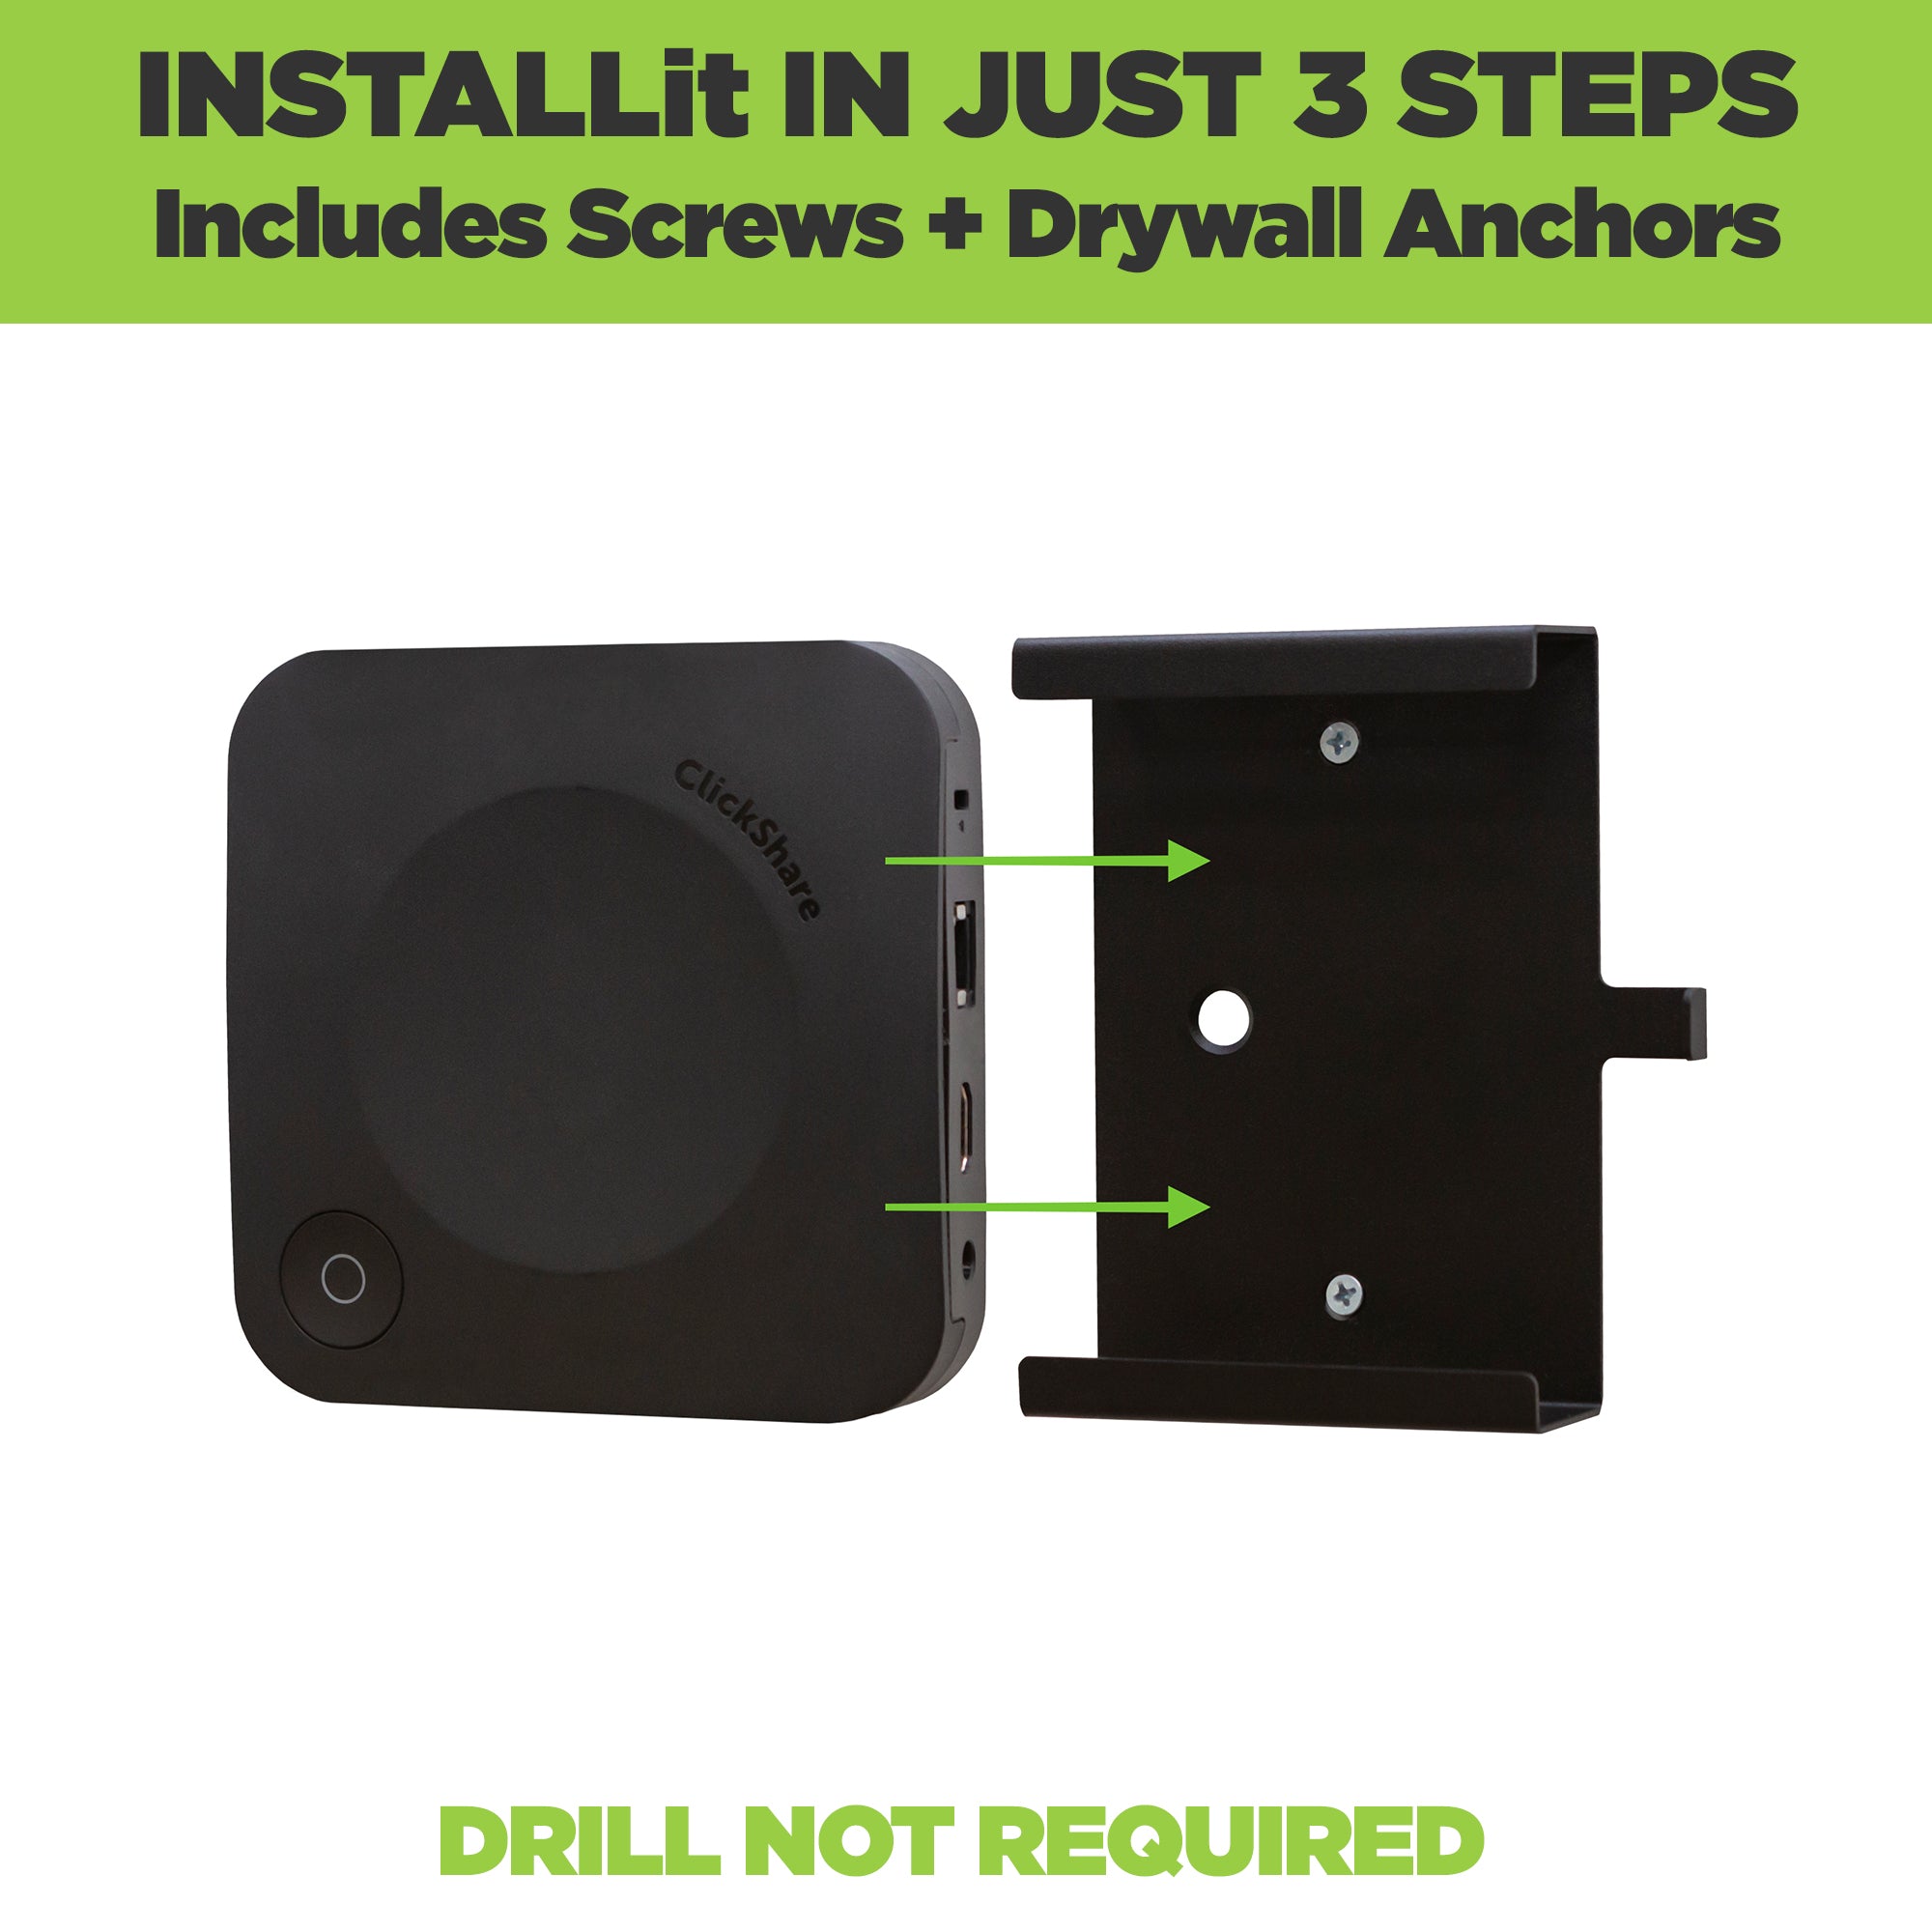 The HIDEit Barco Wall Mount for ClickShare devices is easy to install. Drill not required for installation.